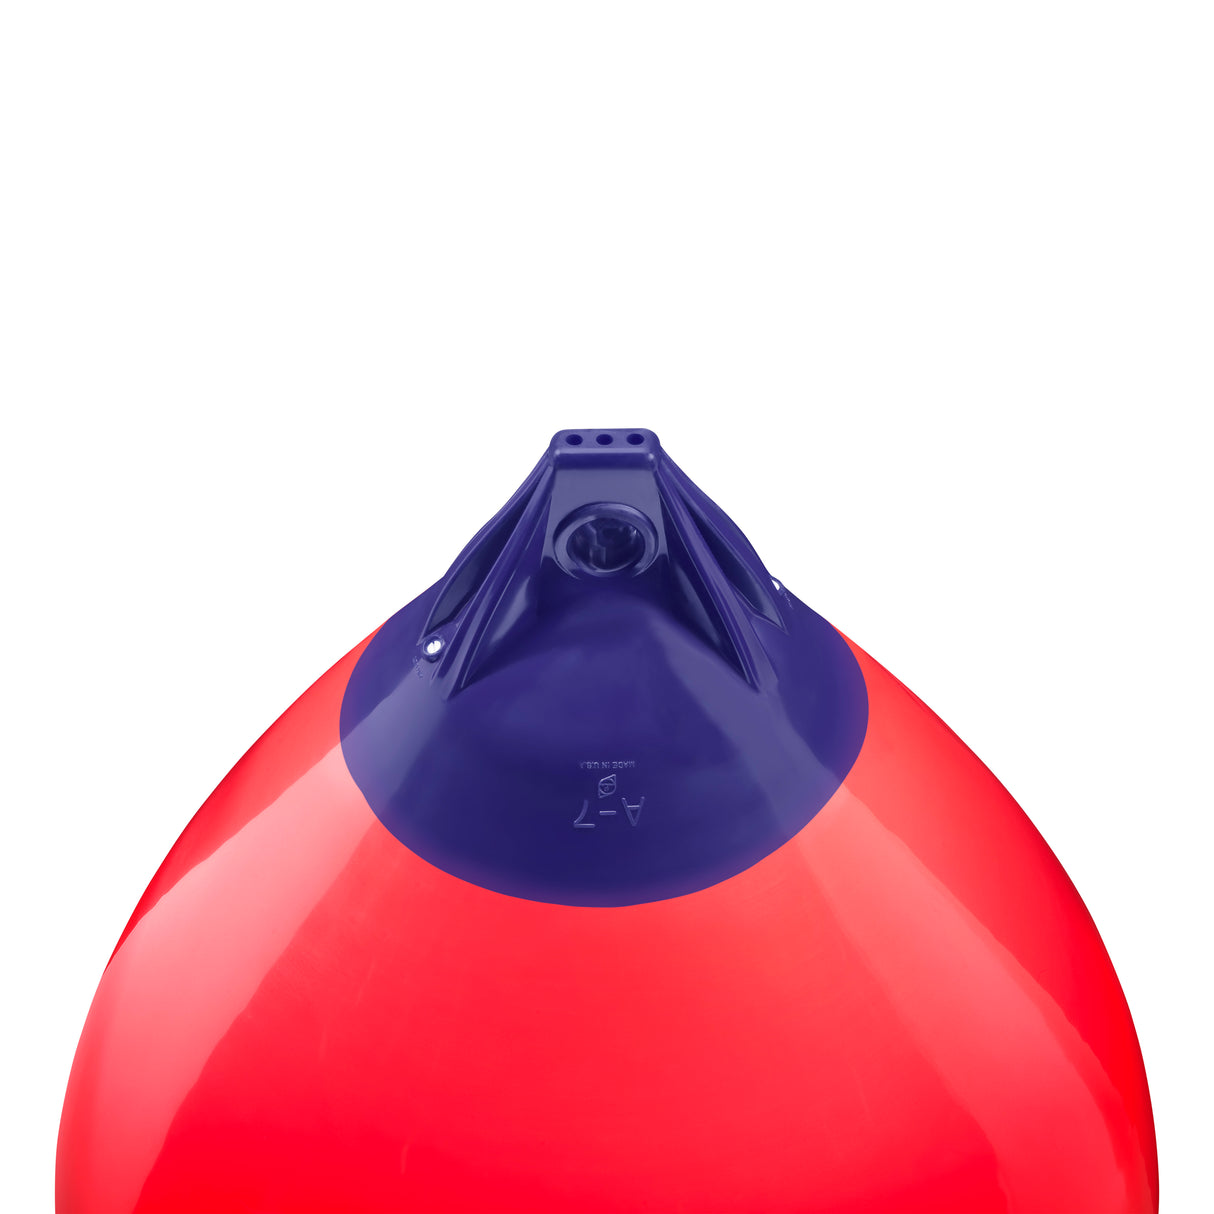 Red inflatable buoy, Polyform A-7 angled shot